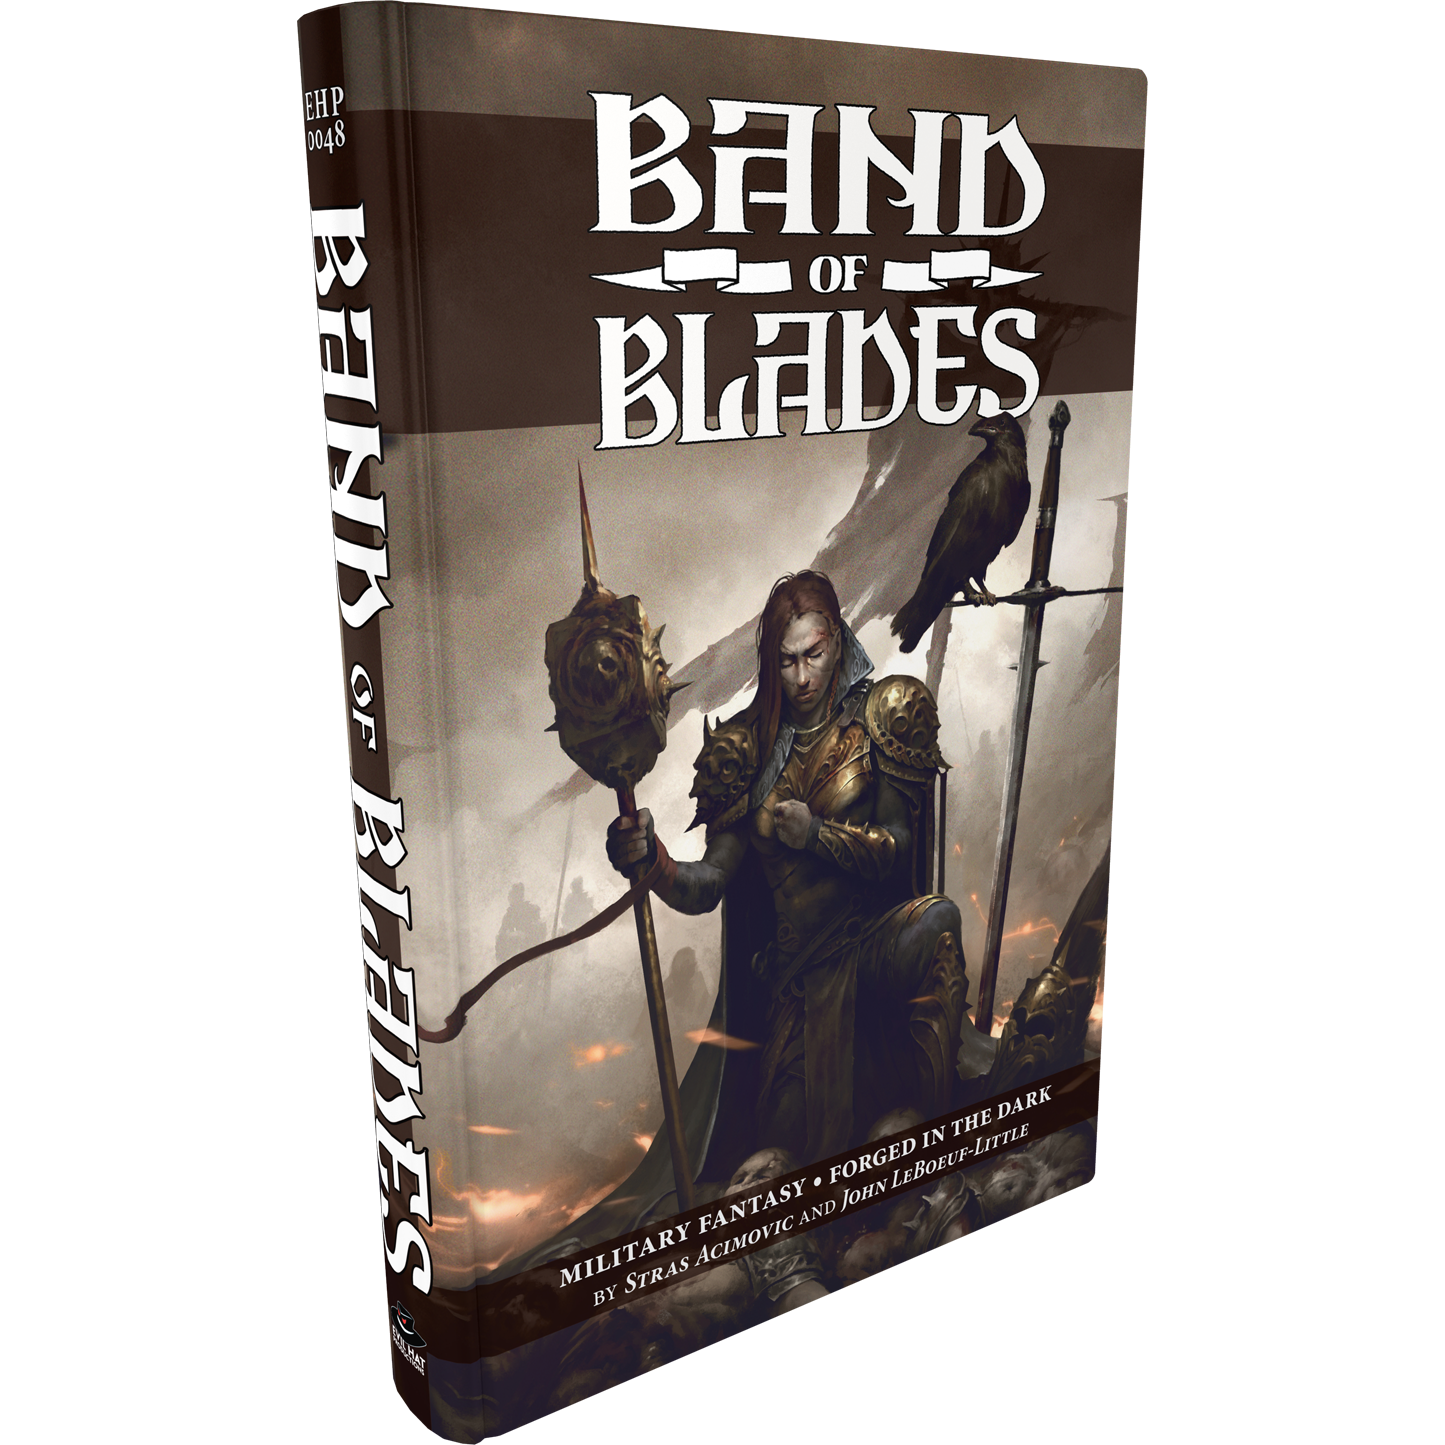 Cover art for Band of Blades